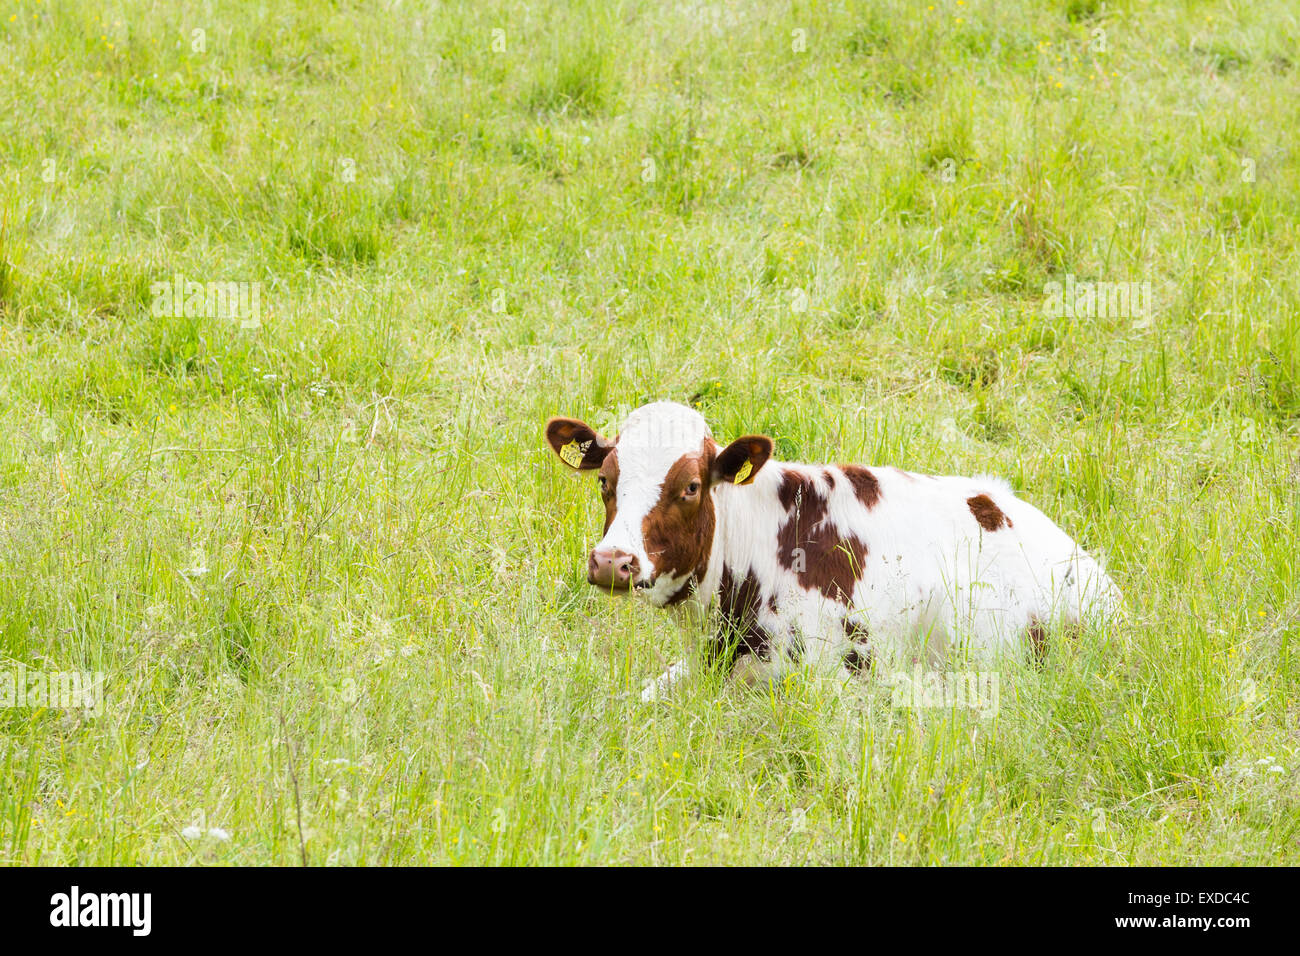 A Brown and White Cow Lying in High Grass Looking Towards the Camera Stock Photo